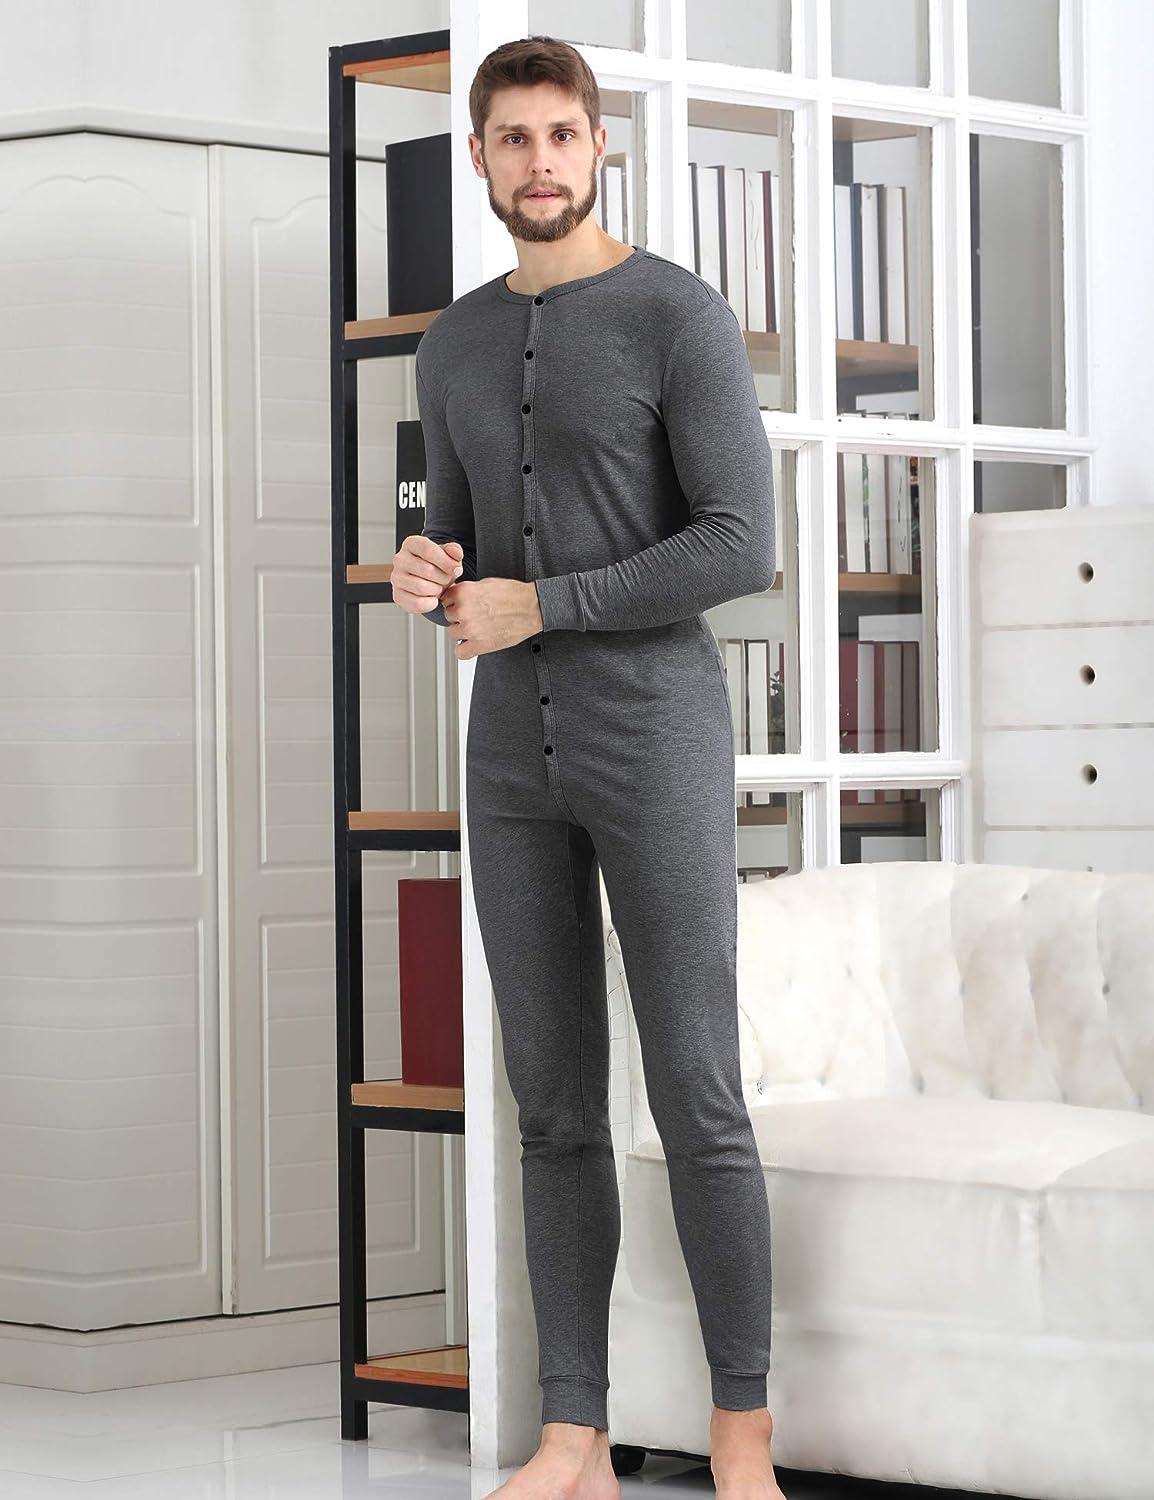 These Bestselling Thermal Pajamas Are on Sale for 45% Off